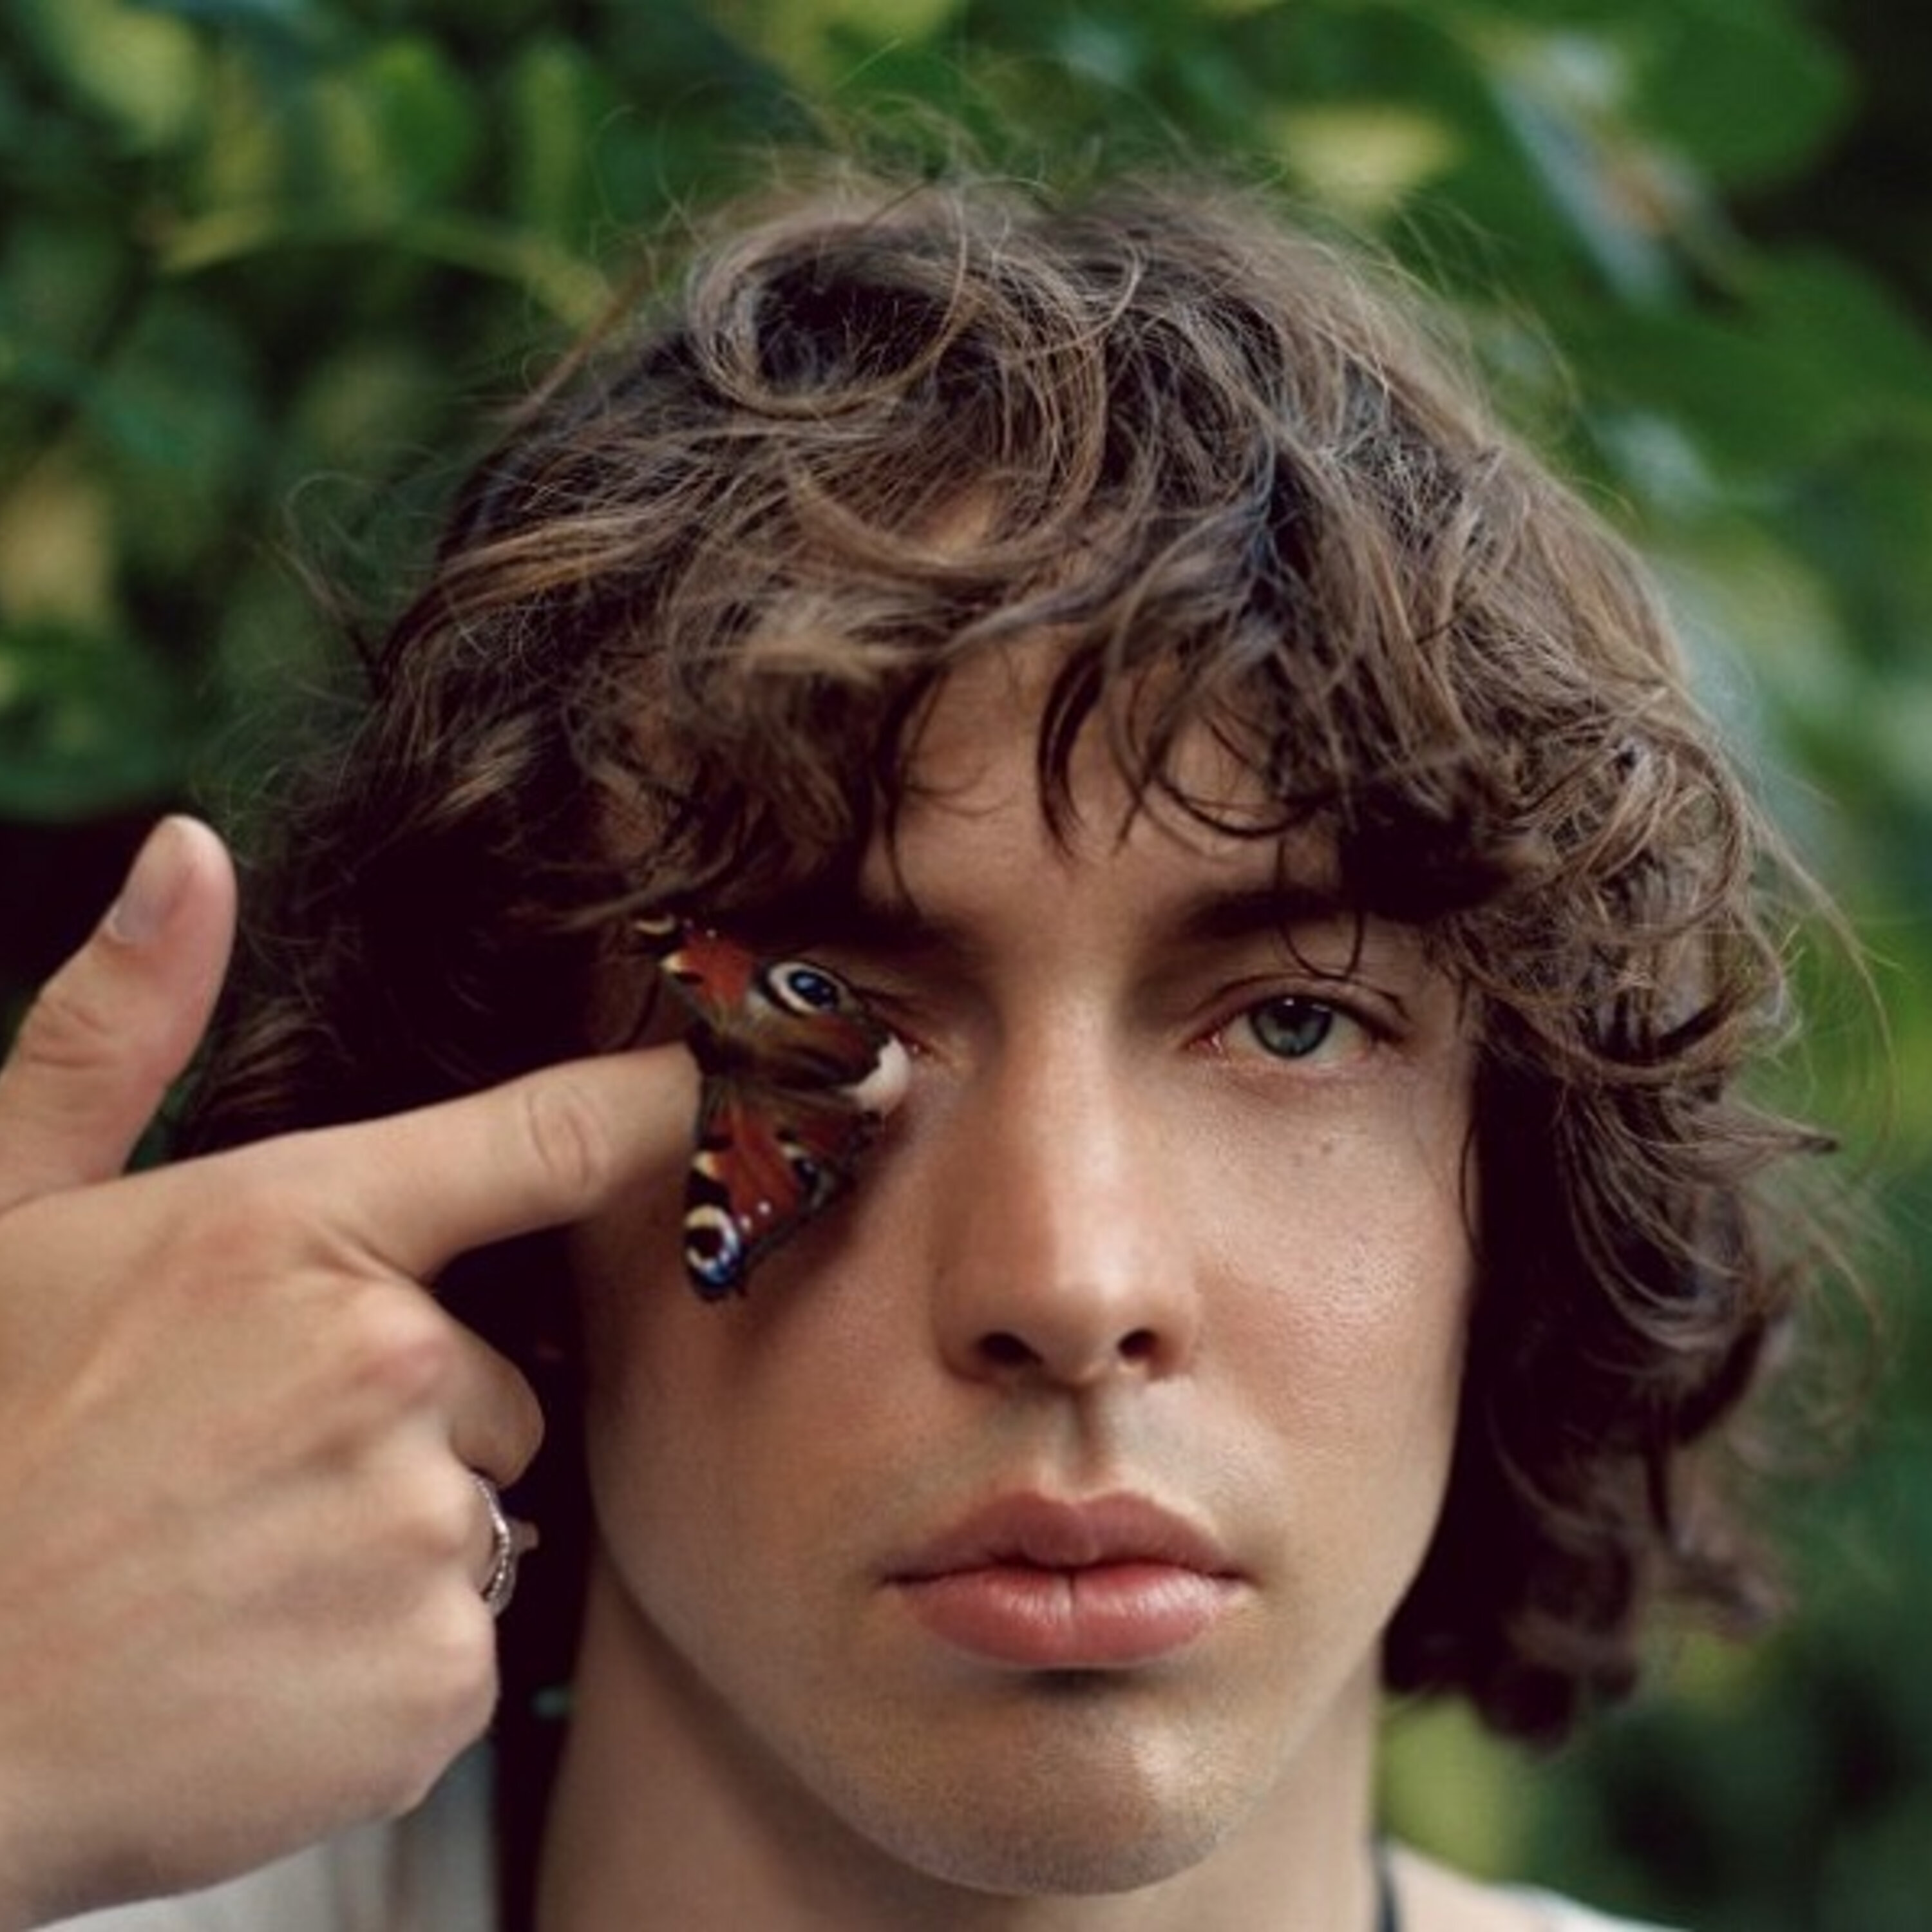 Barns Courtney | Interview